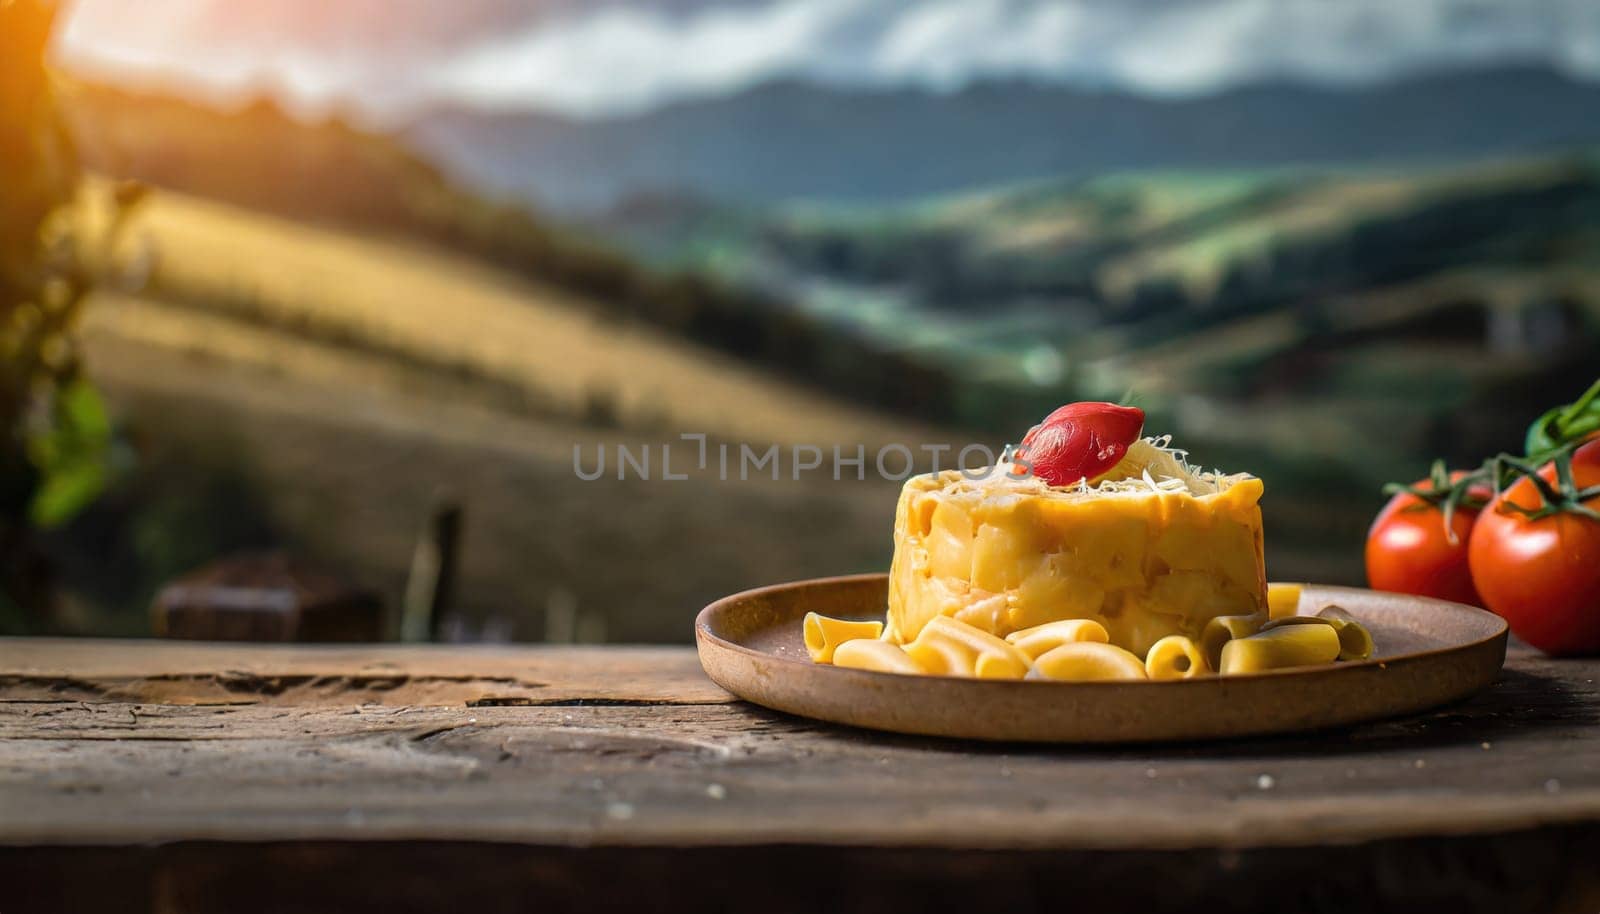 Copy Space image of Mac and cheese american macaroni pasta with cheesy Cheddar sauce with landscape view background.